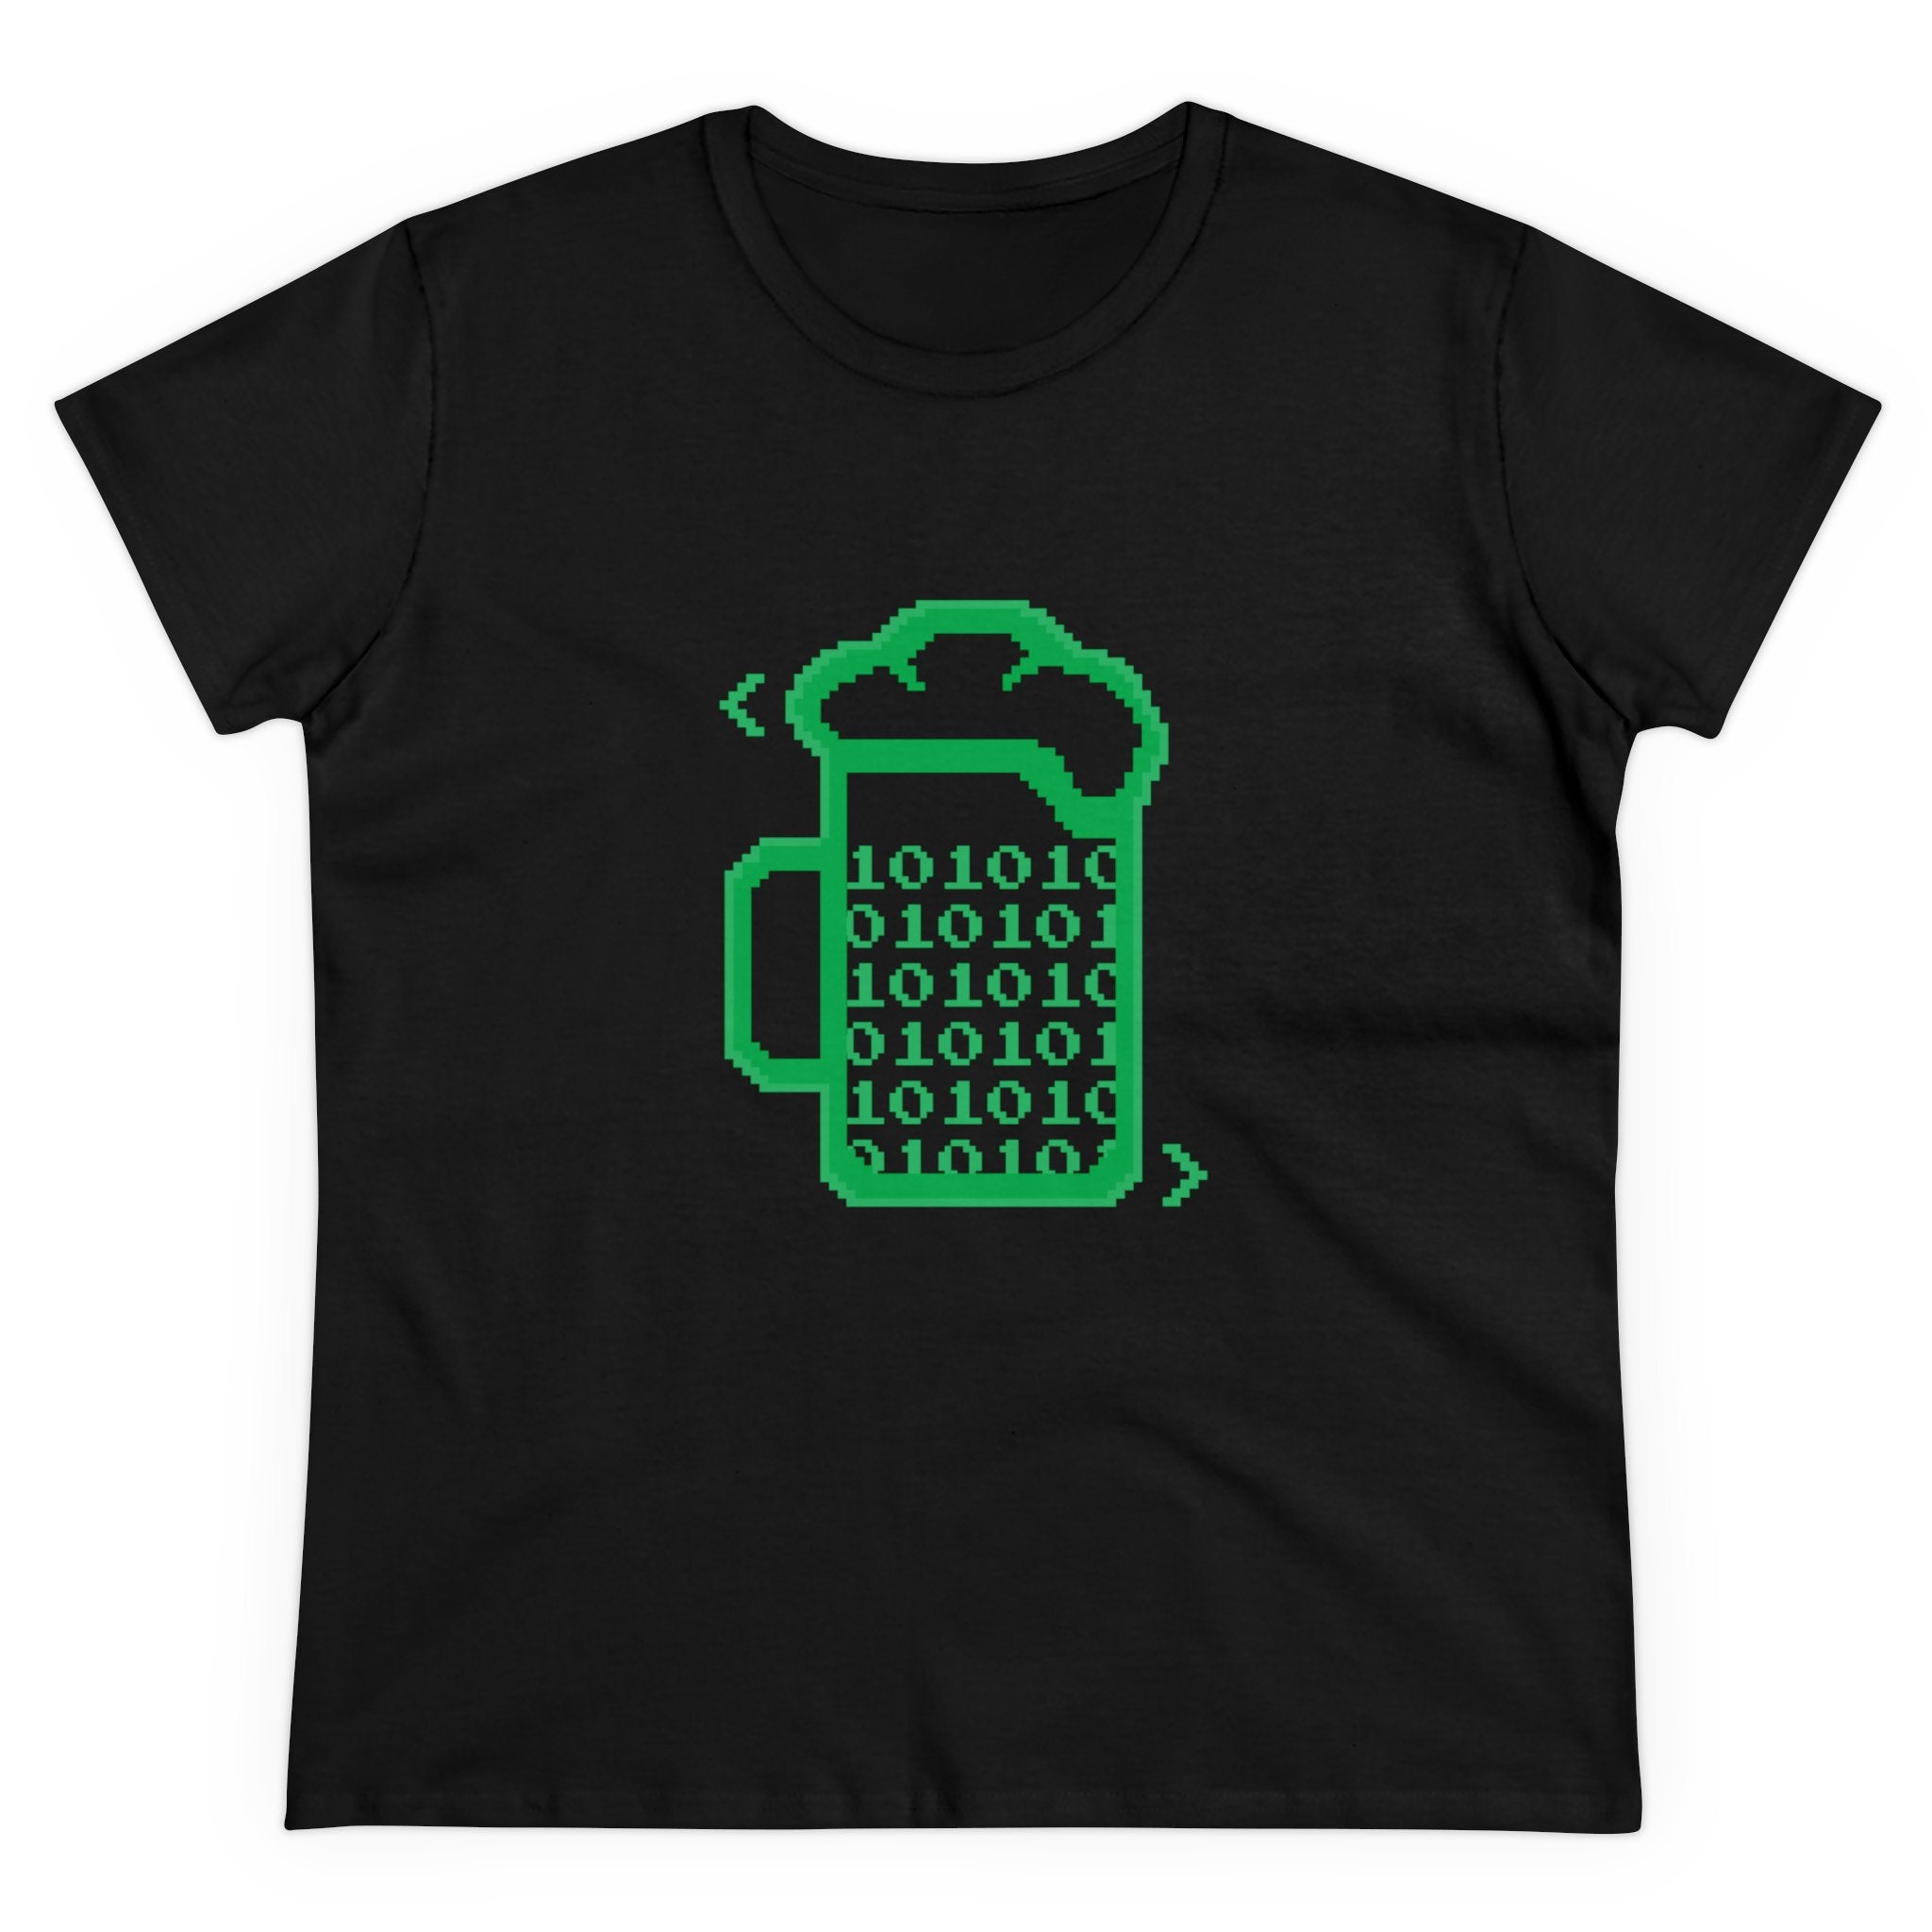 Beer Code - Women's Tee made of pre-shrunk cotton, featuring a green pixel art design of a beer mug filled with binary code (zeros and ones).